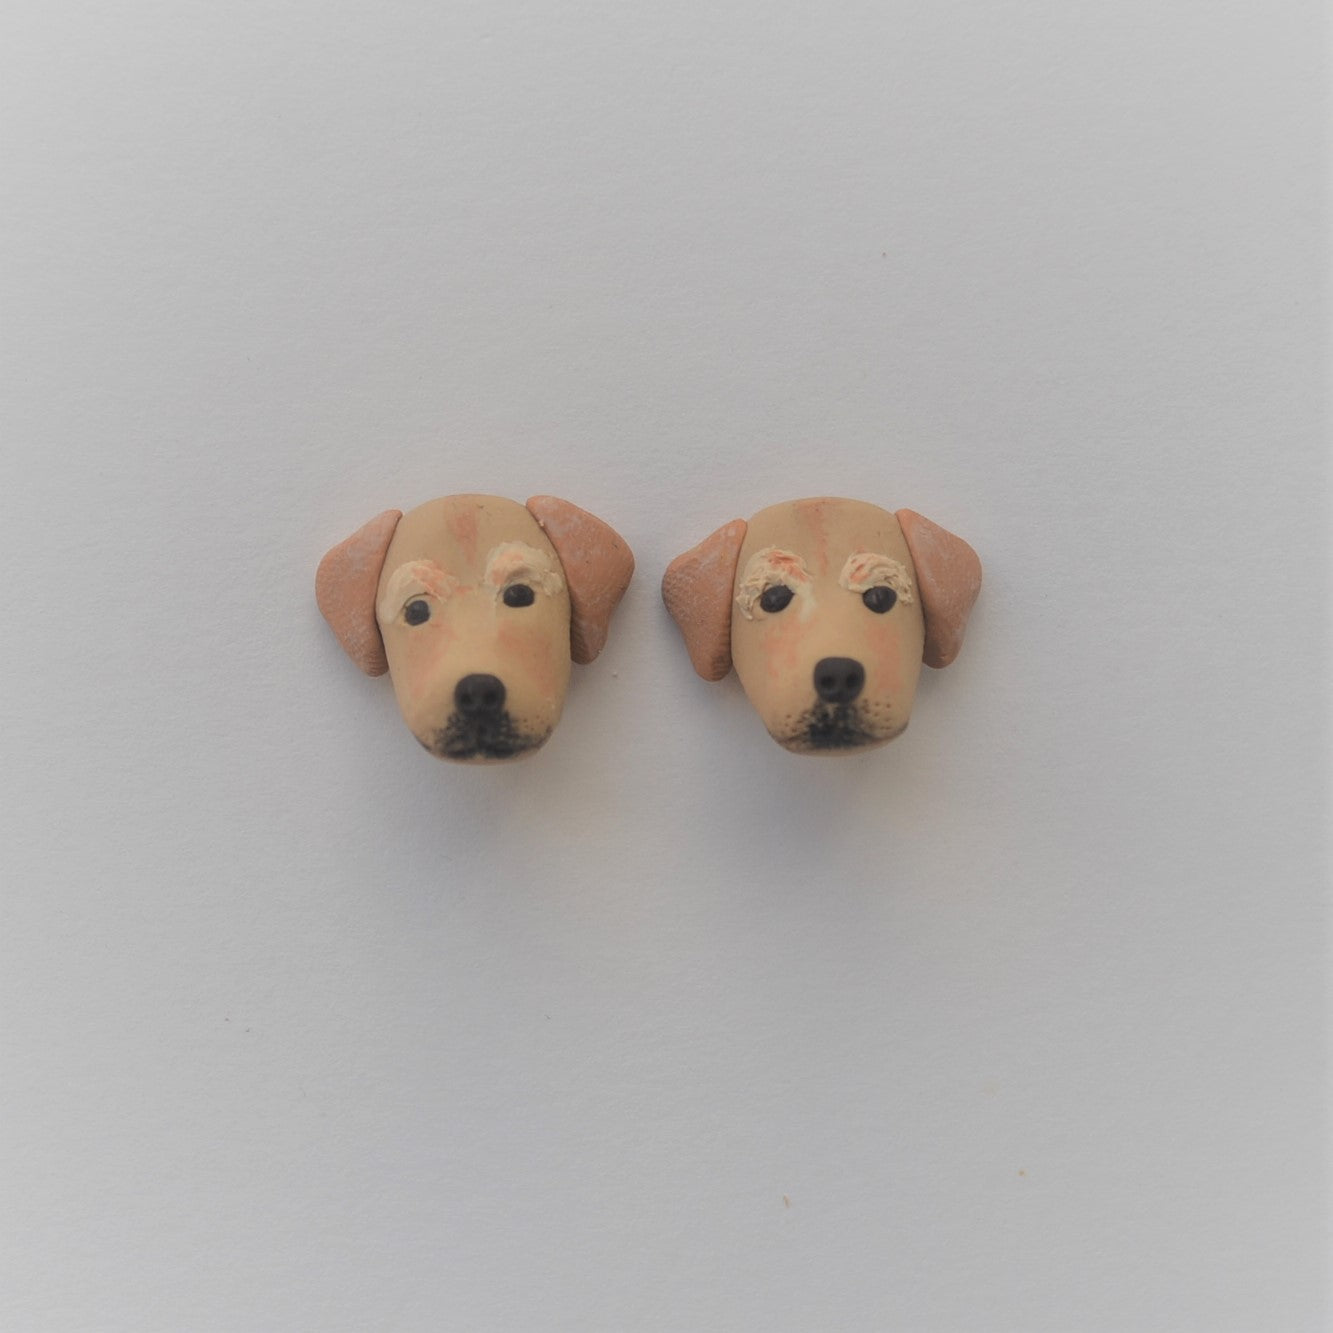 Handmade polymer clay golden lab retriever stud earrings shown on white background